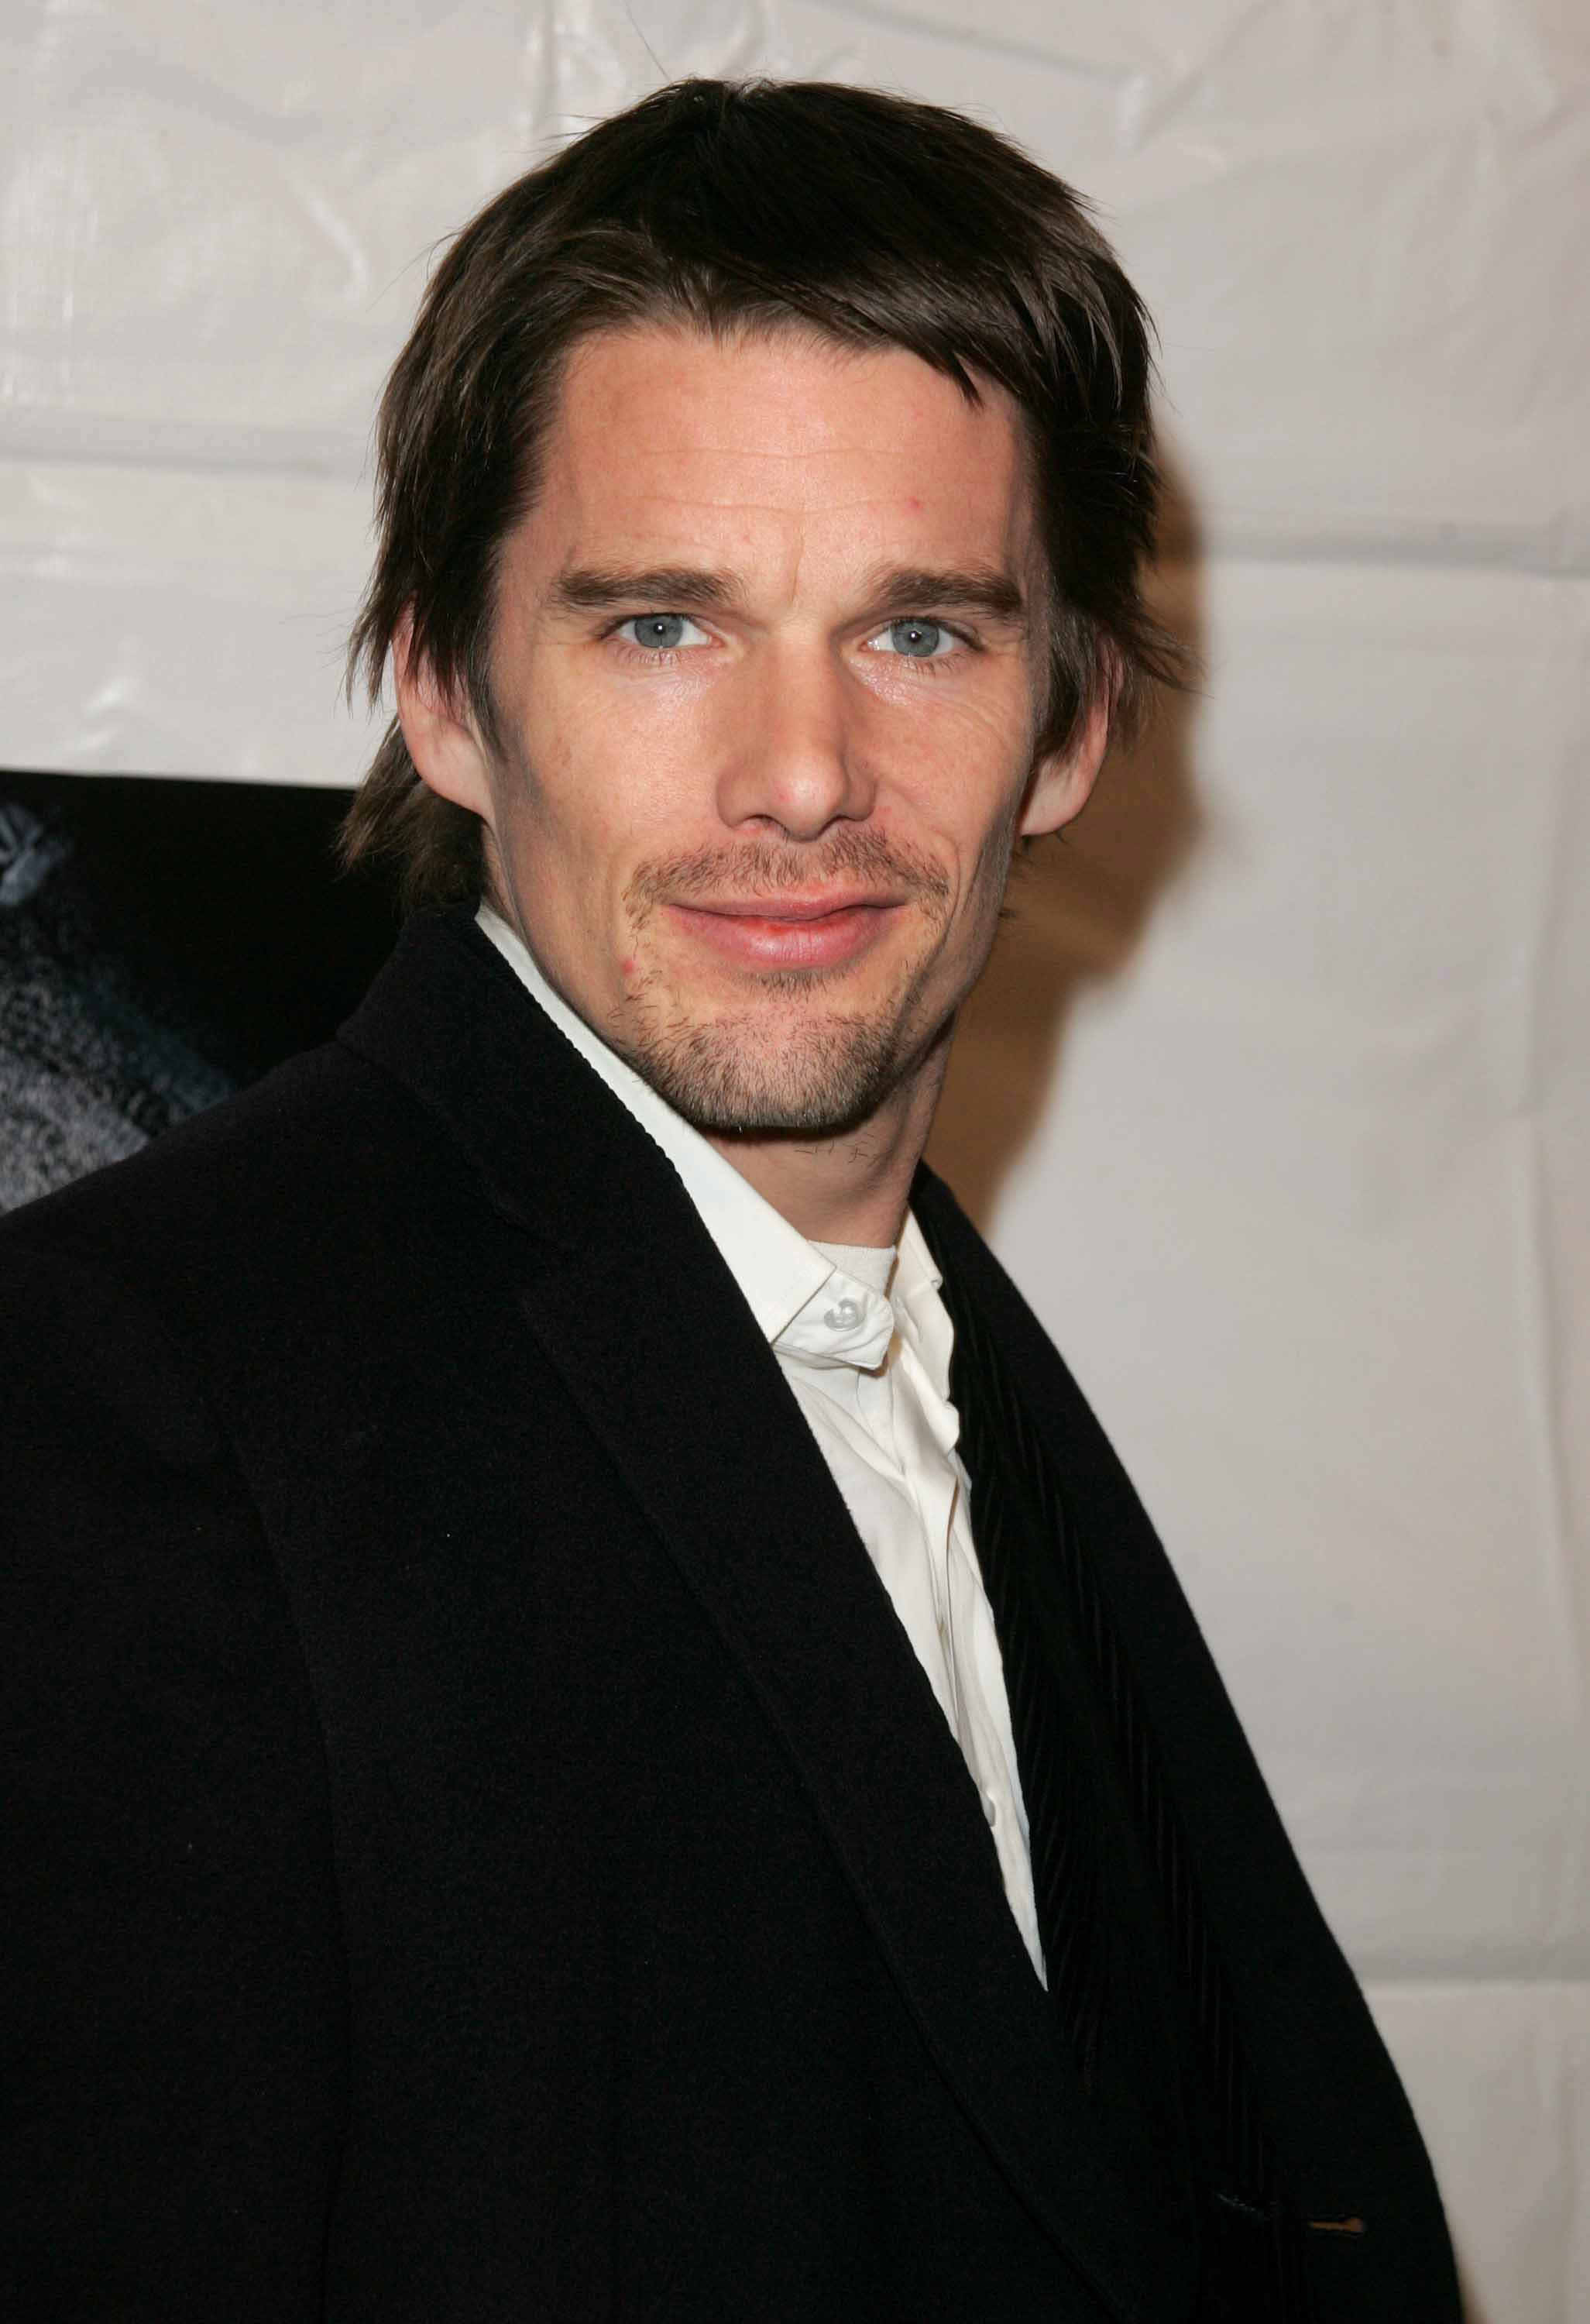 Ethan Hawke photo 32 of 89 pics, wallpaper - photo #305135 - ThePlace2